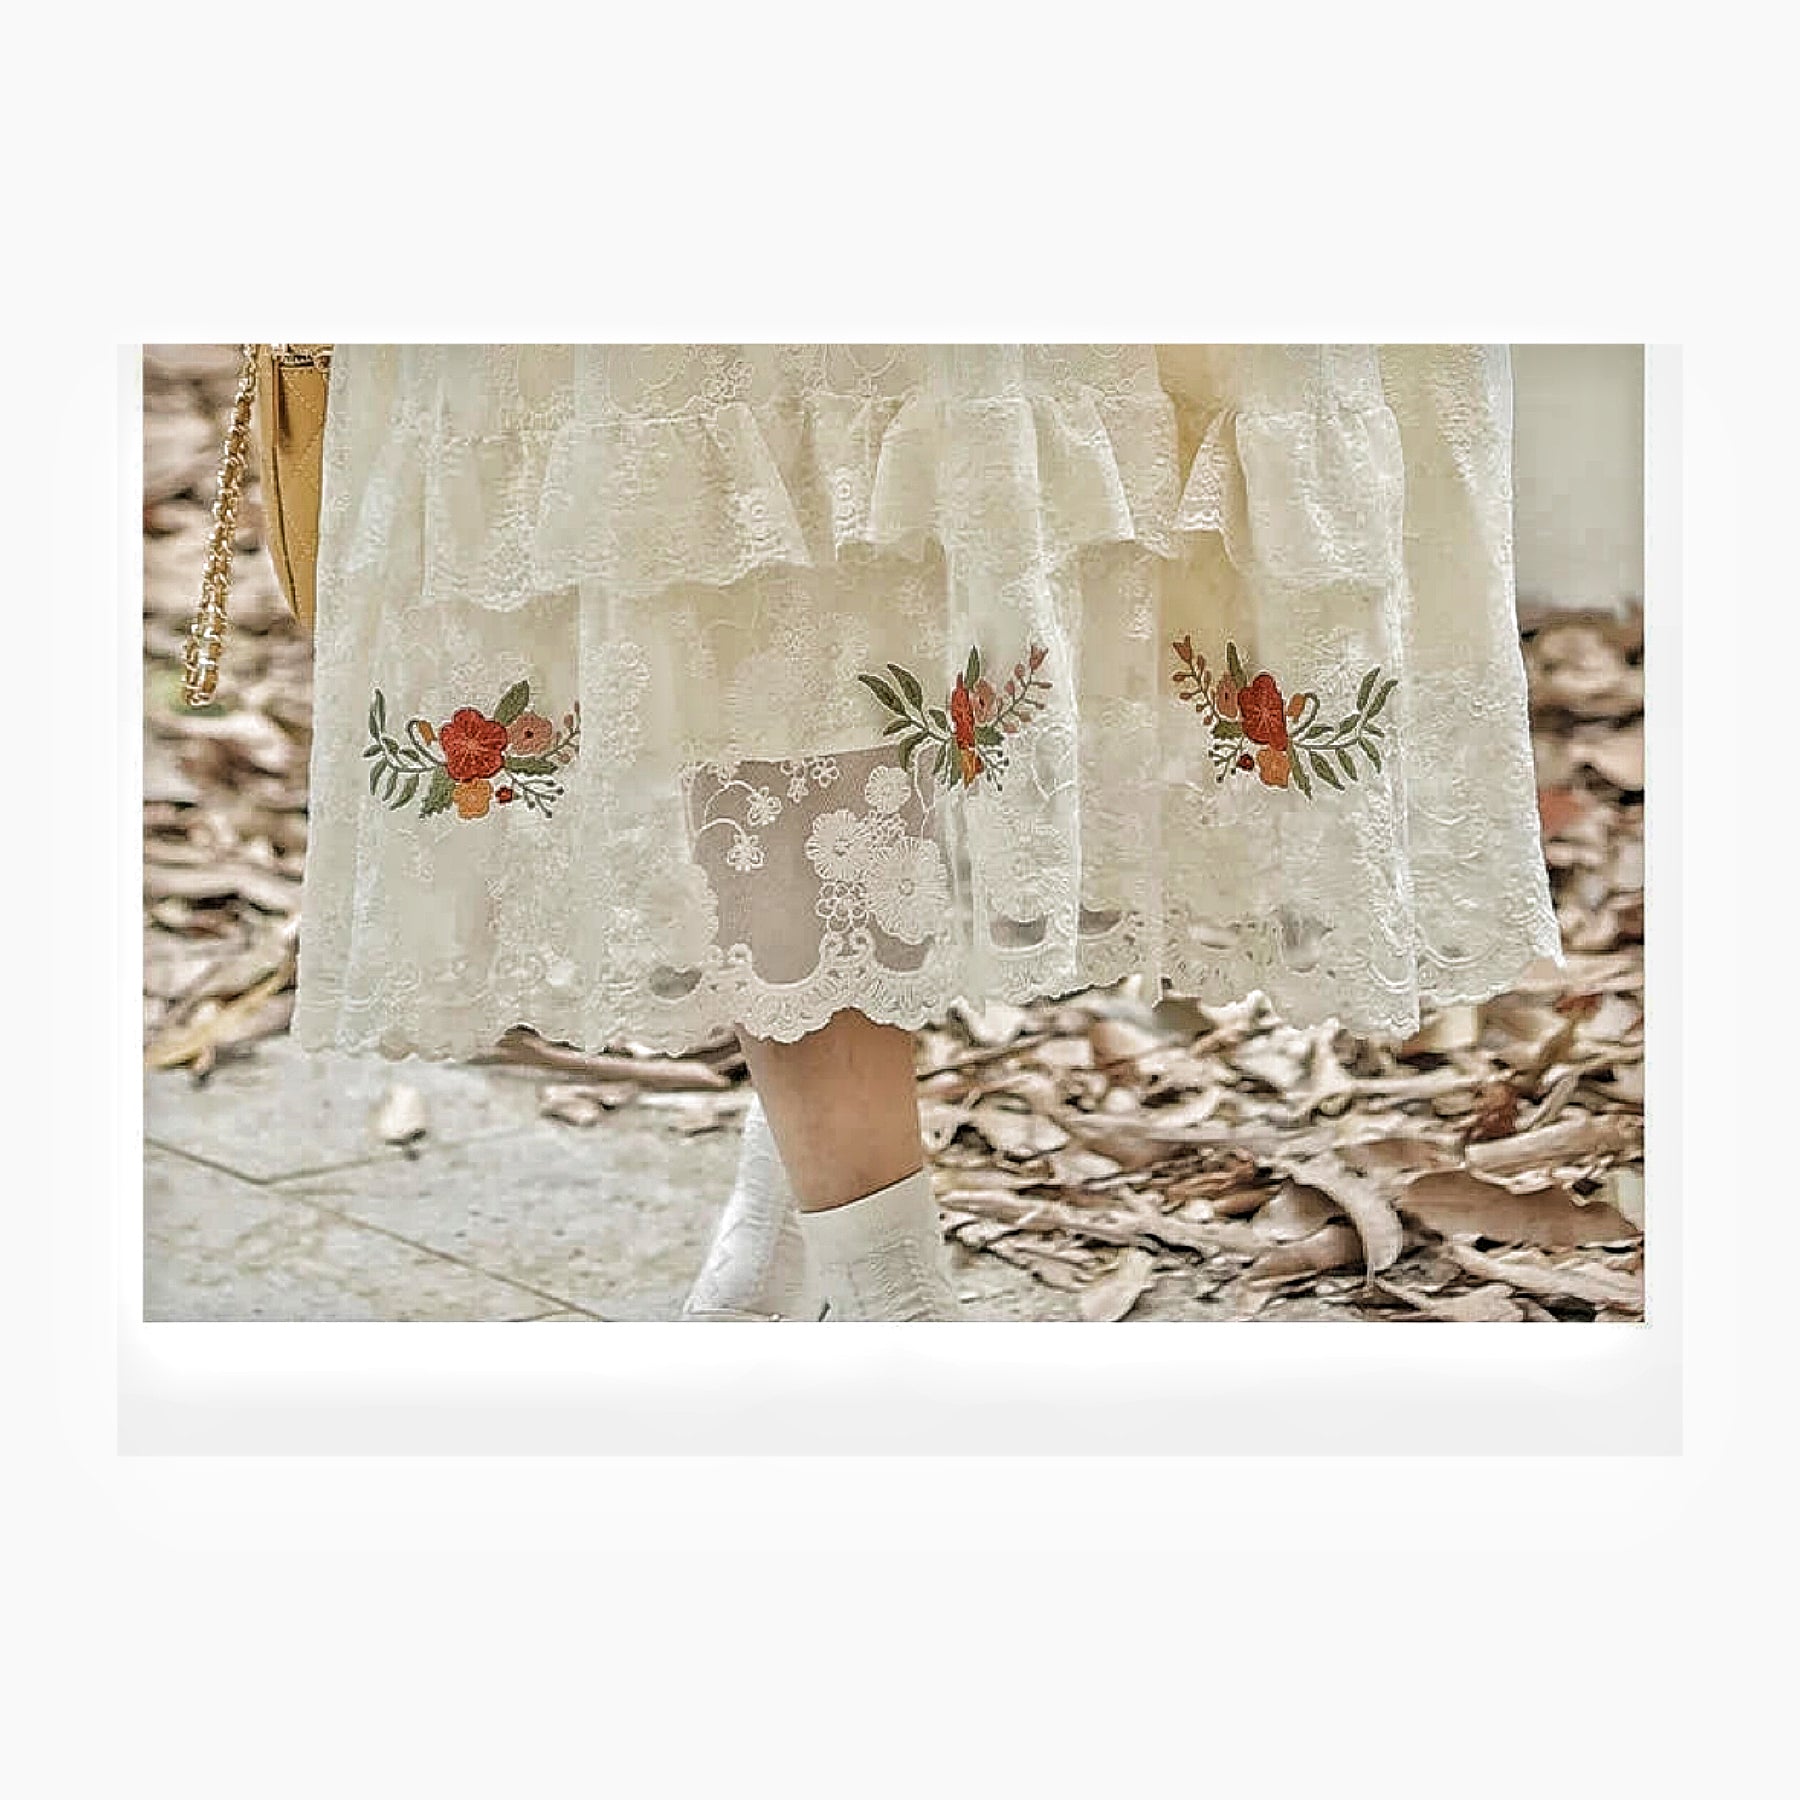 Sunlight Spirit Victorian-Style Lace Embroidered Cottagecore Dress